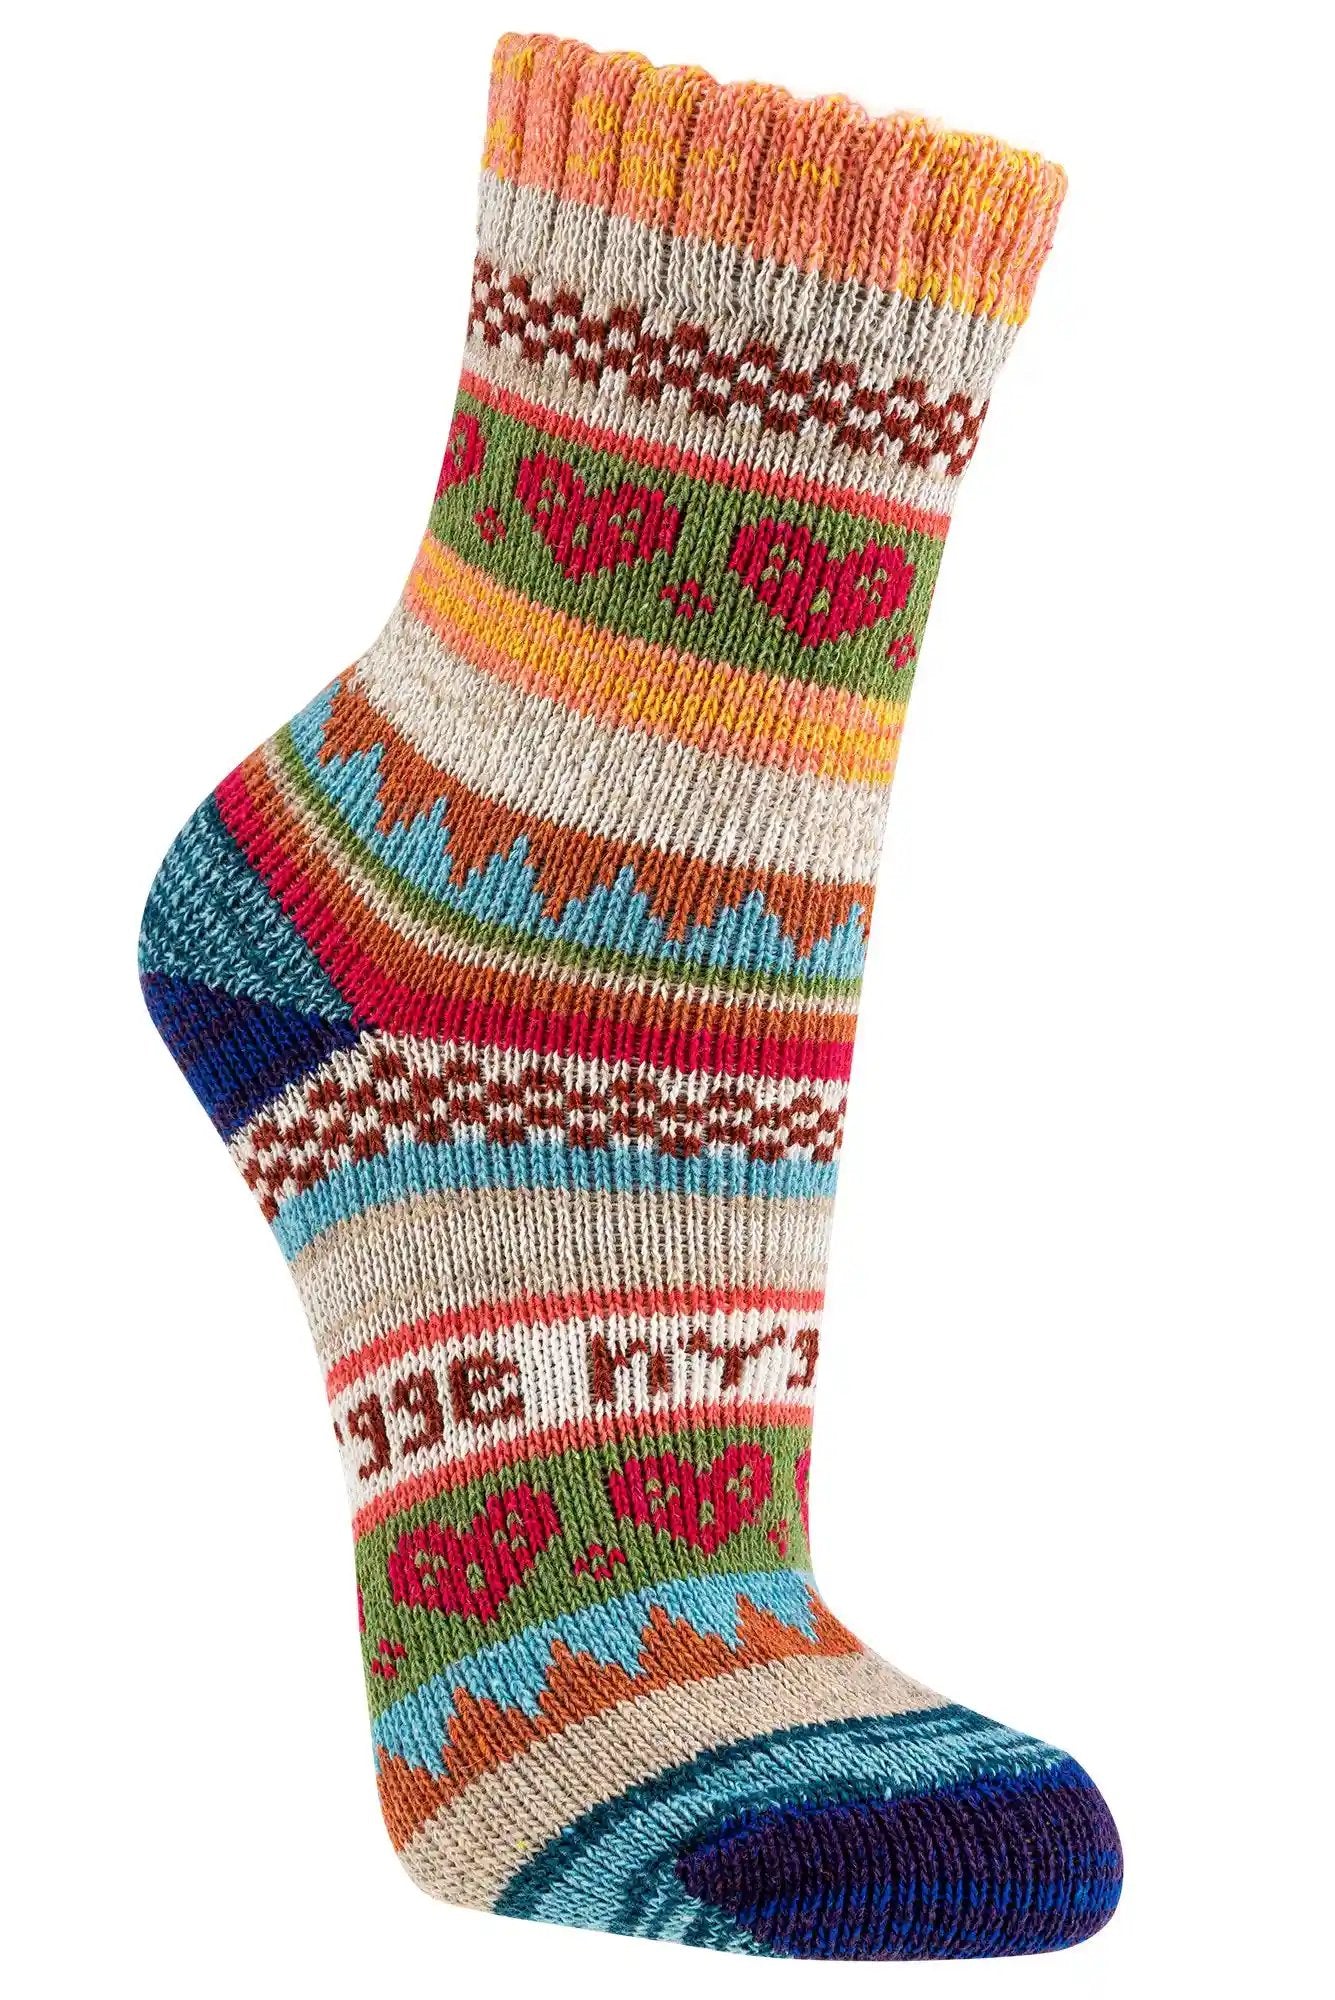 3 or 6 pairs of colorful Norwegian socks with a beautiful hygge pattern made from 90% cotton